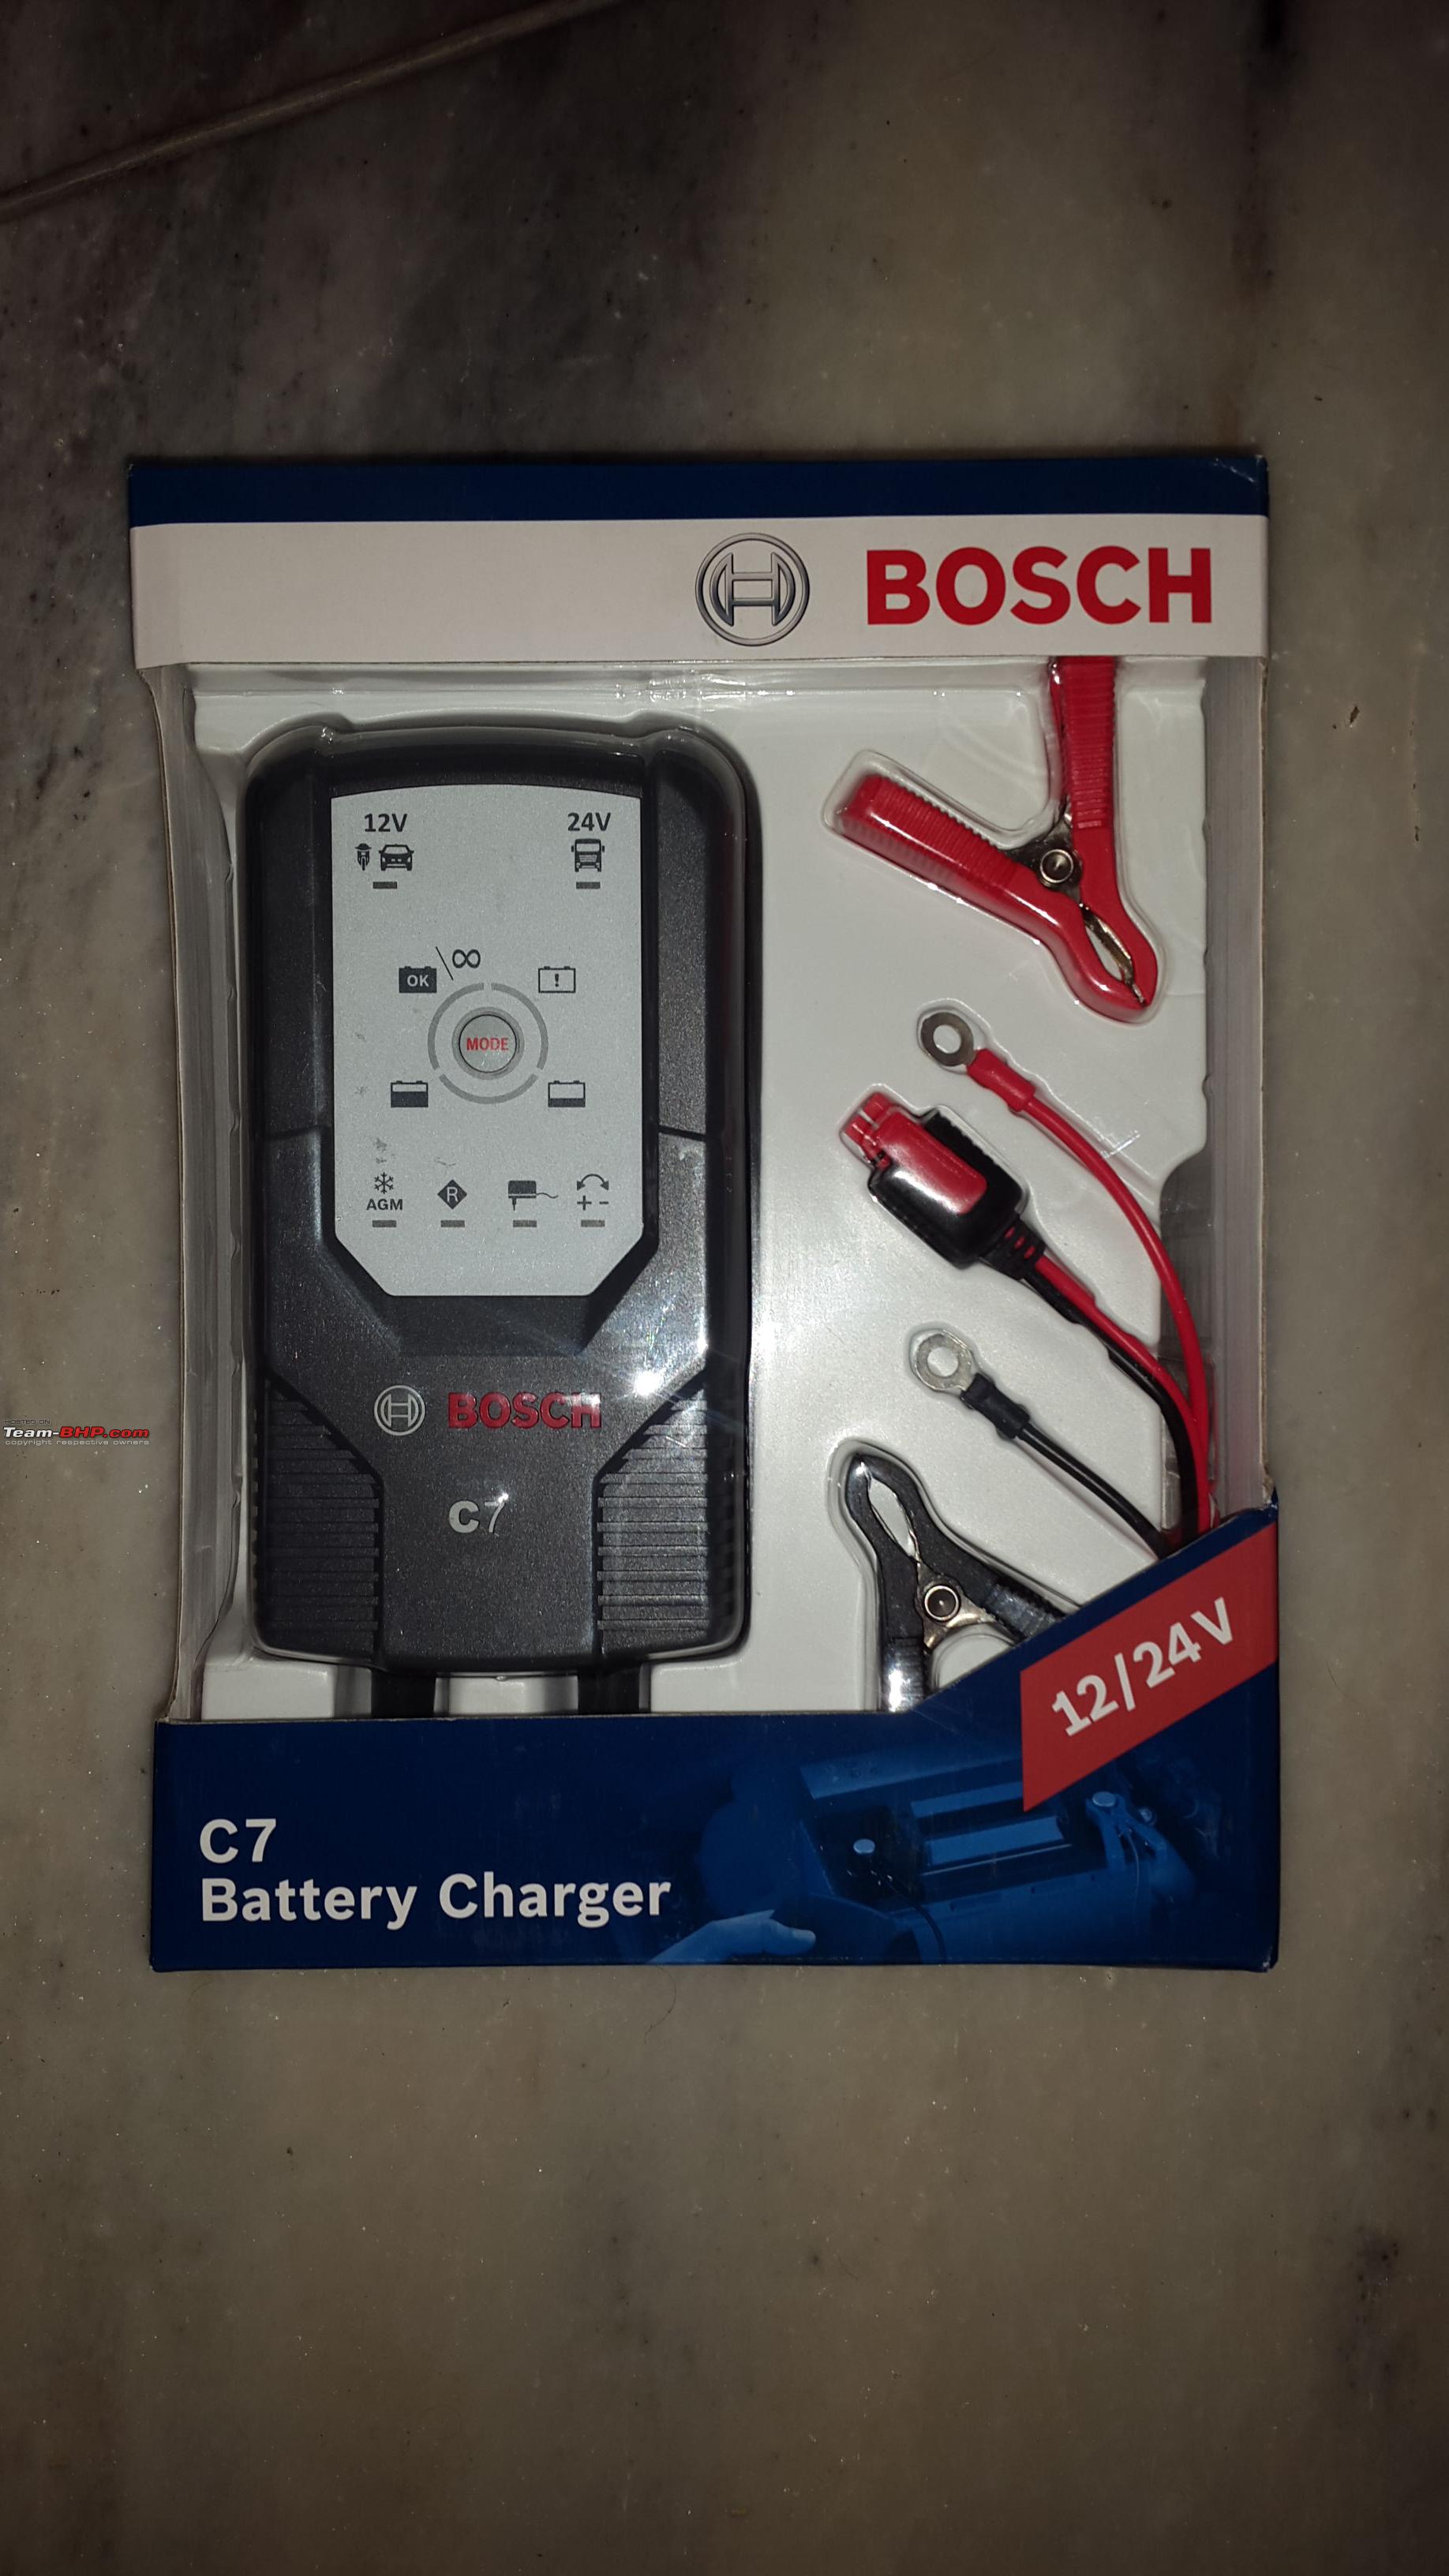 BOSCH C3 Battery Charger - 0 Ah Battery for Car & Bike Price in